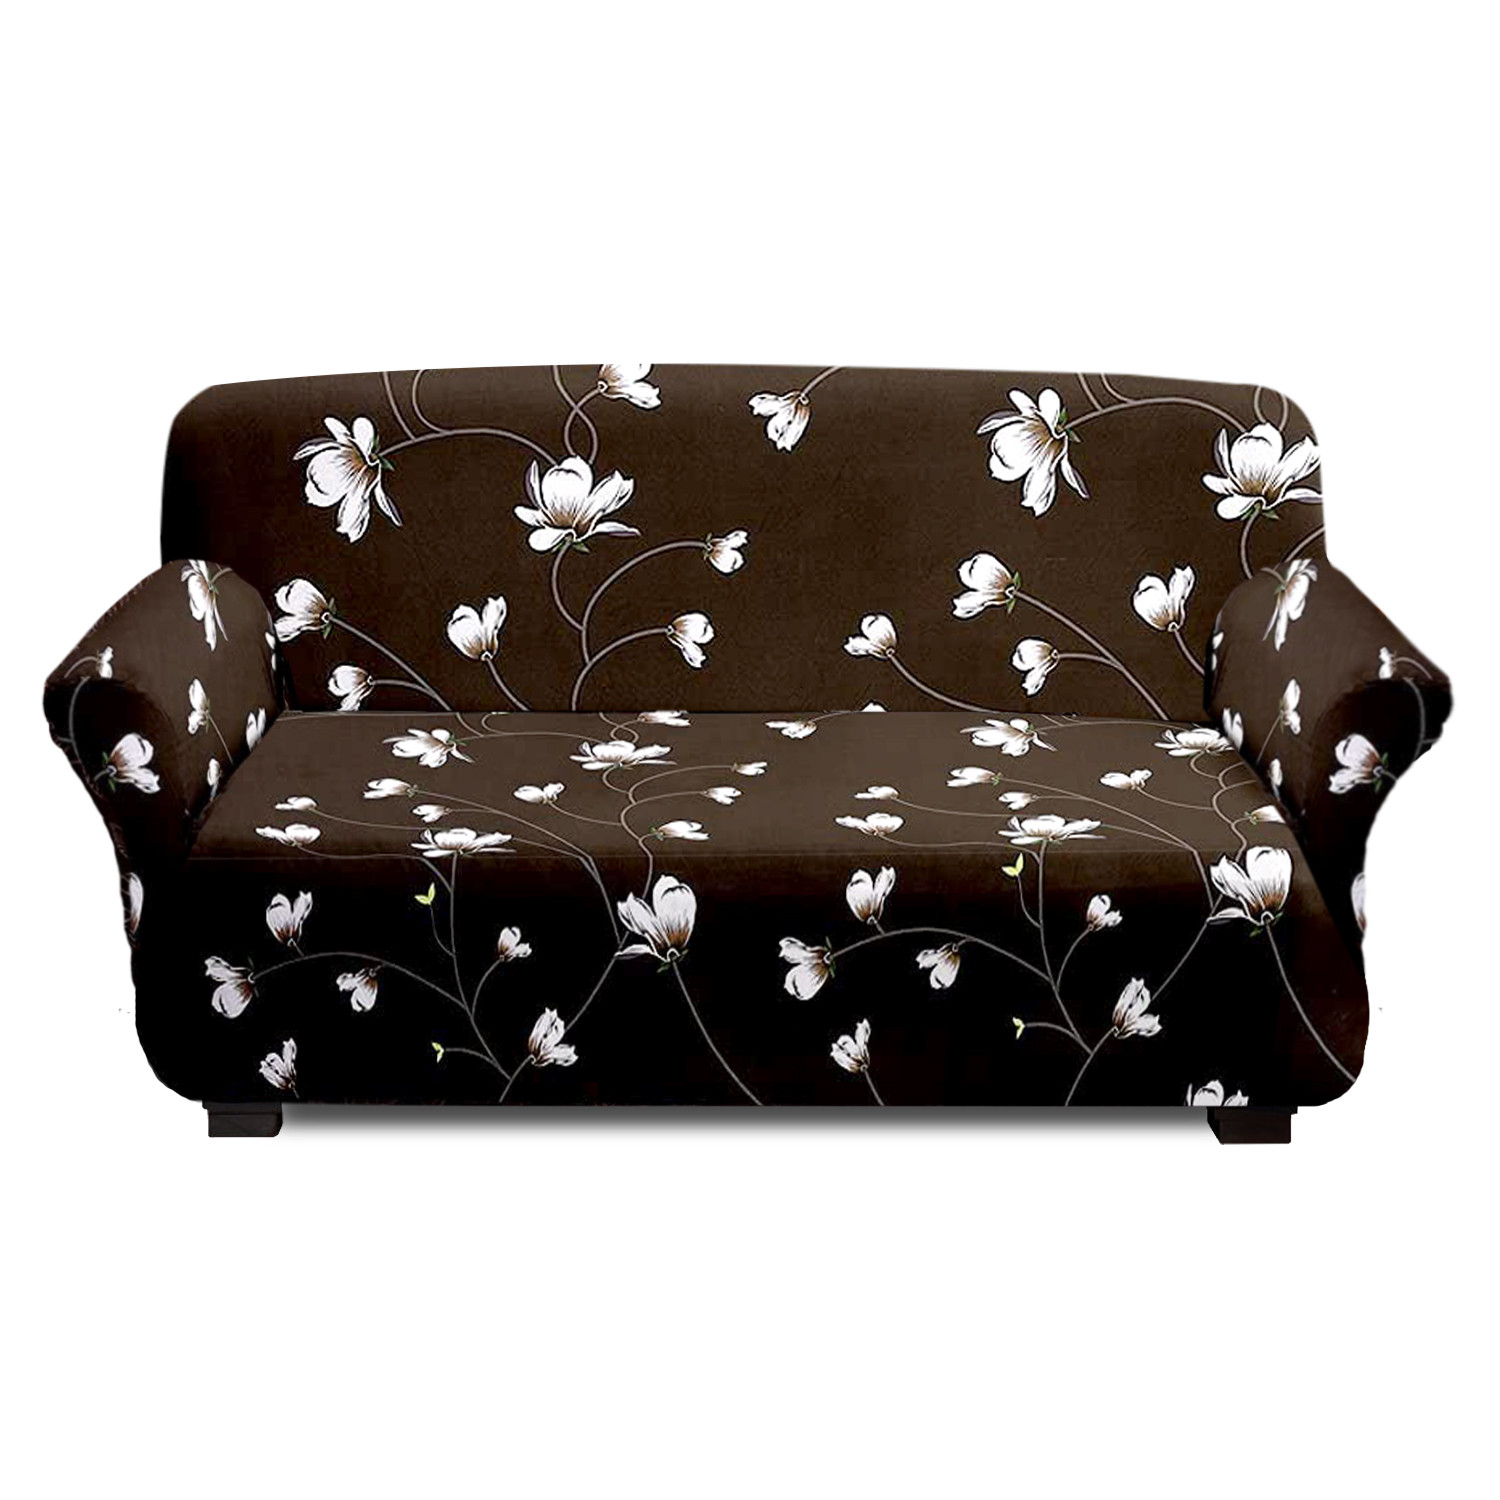 Kuber Industries Flower Printed Stretchable, Non-Slip Polyster 1 & 3 Seater Sofa Cover/Slipcover/Protector Set With Foam Stick, Set of 2 (Brown)